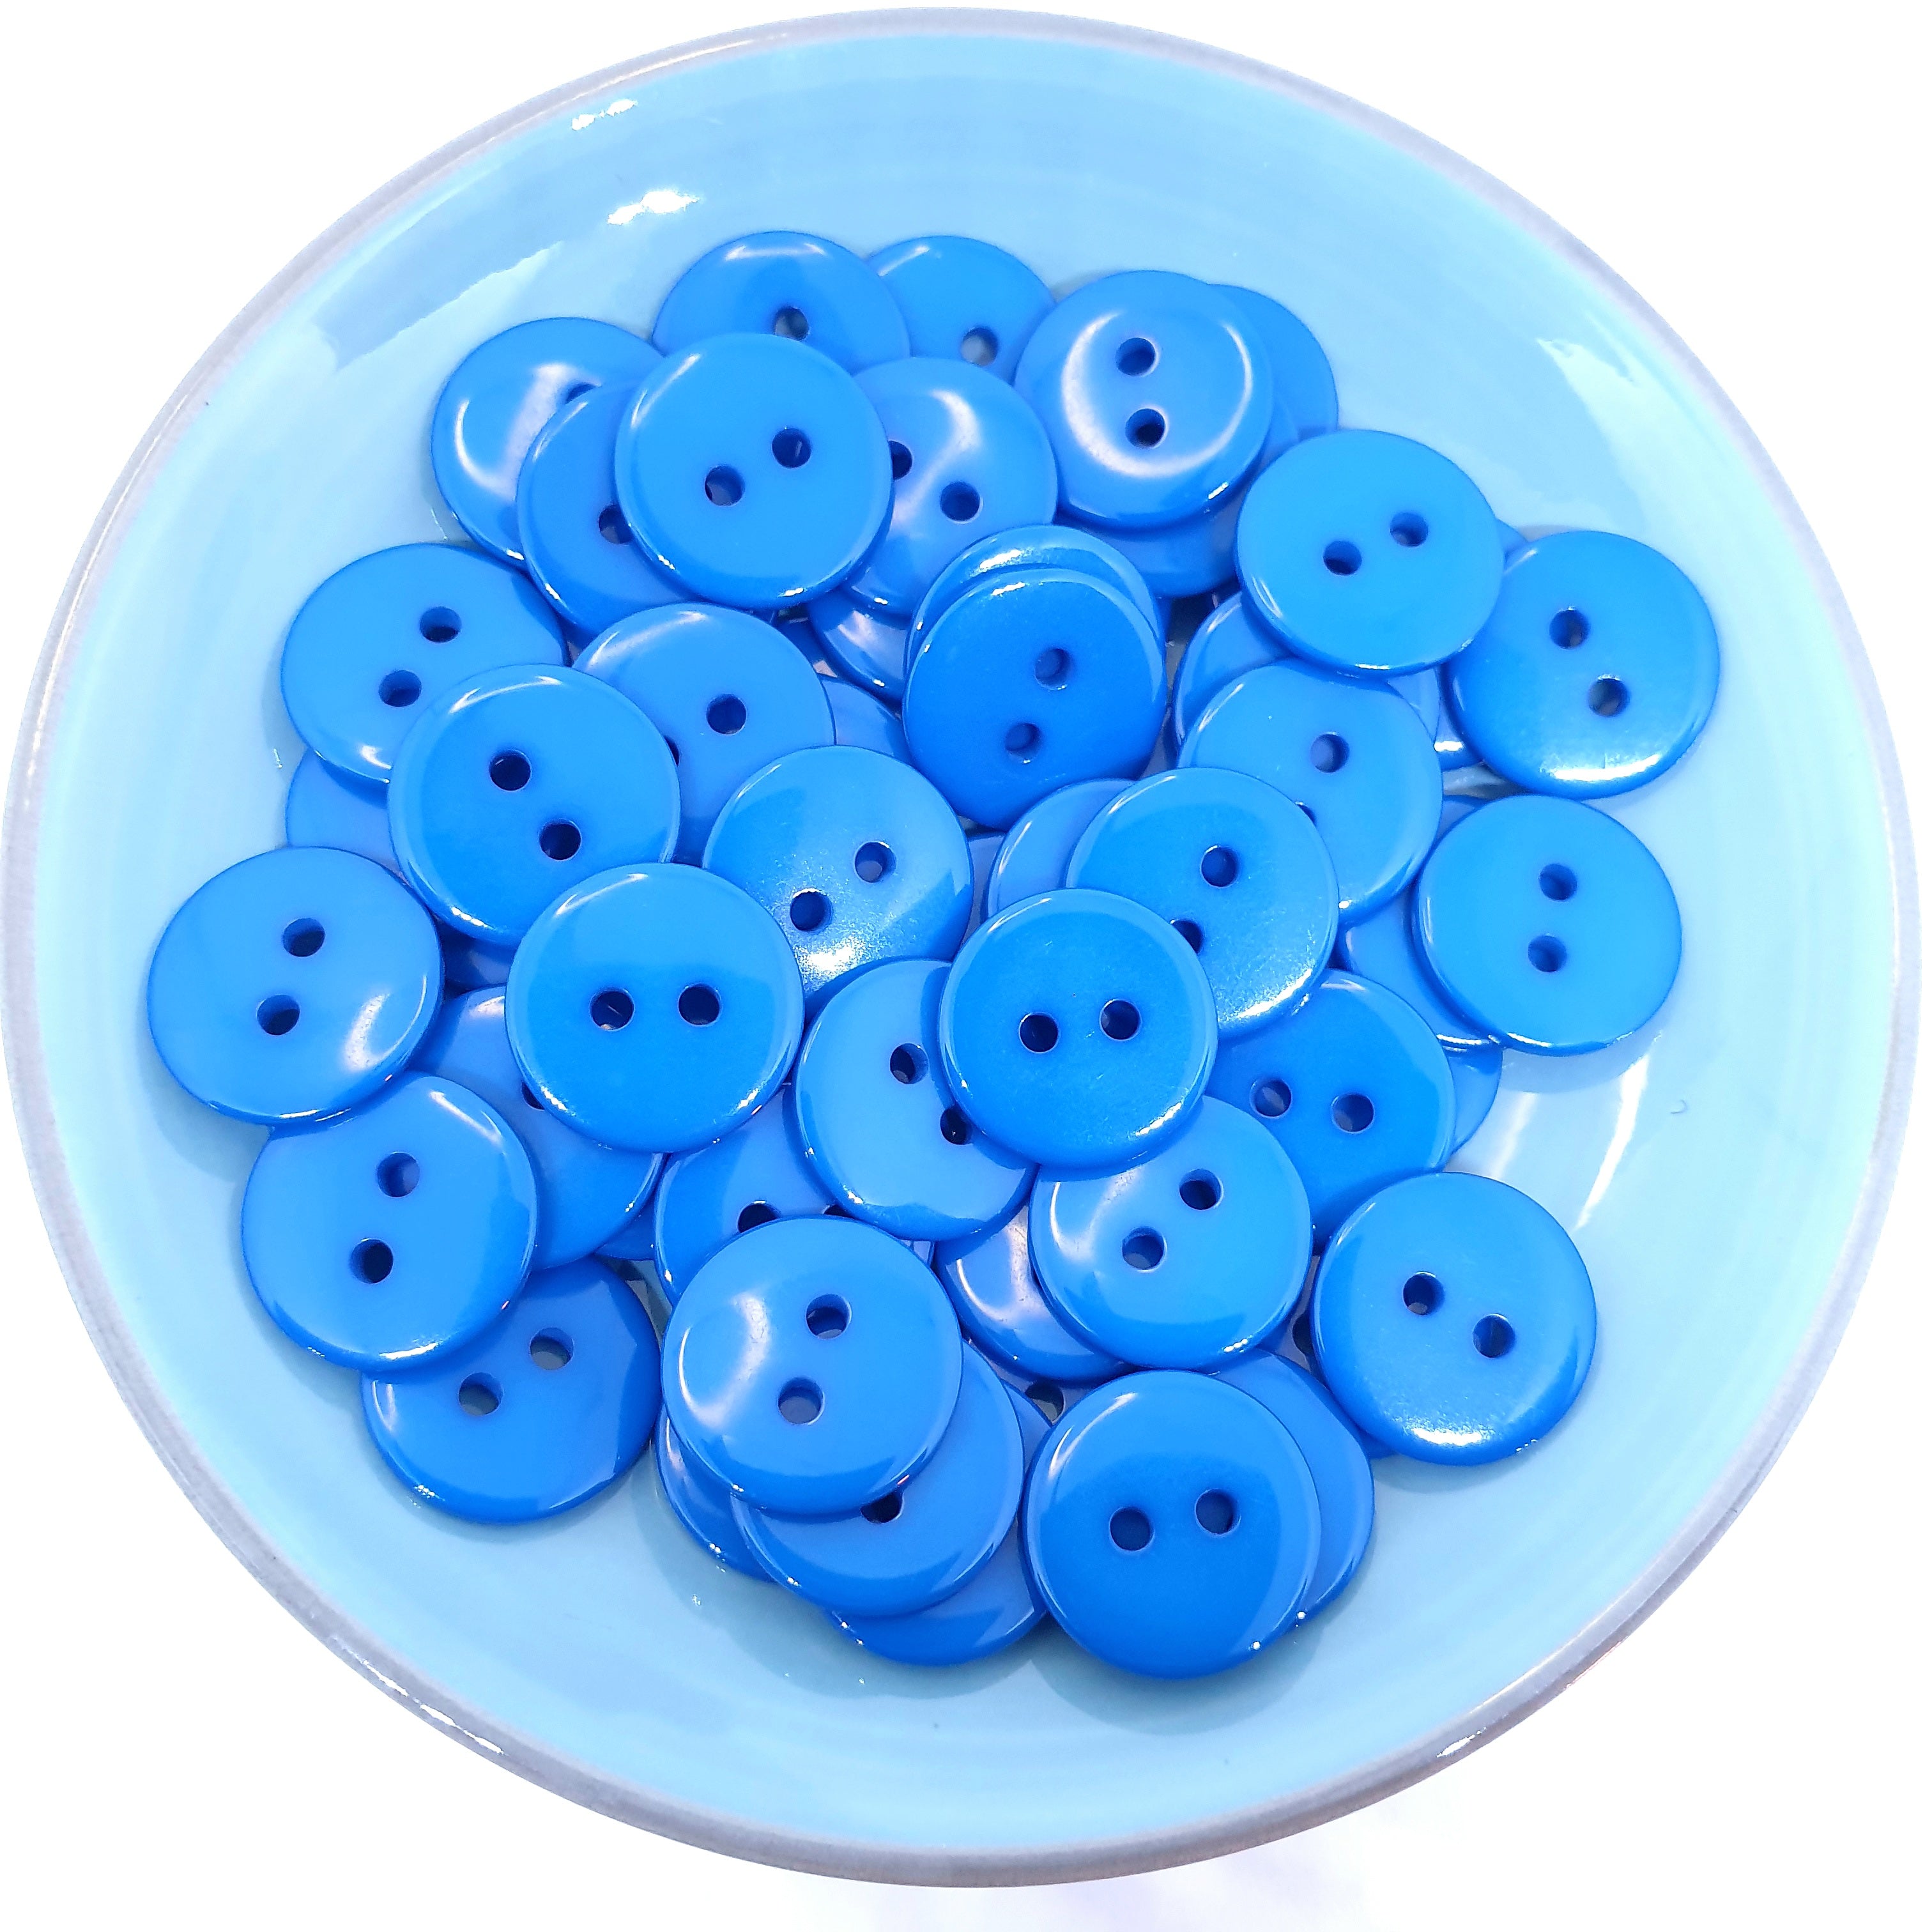 MajorCrafts 72pcs 15mm Royal Blue 2 Holes Round Resin Sewing Buttons